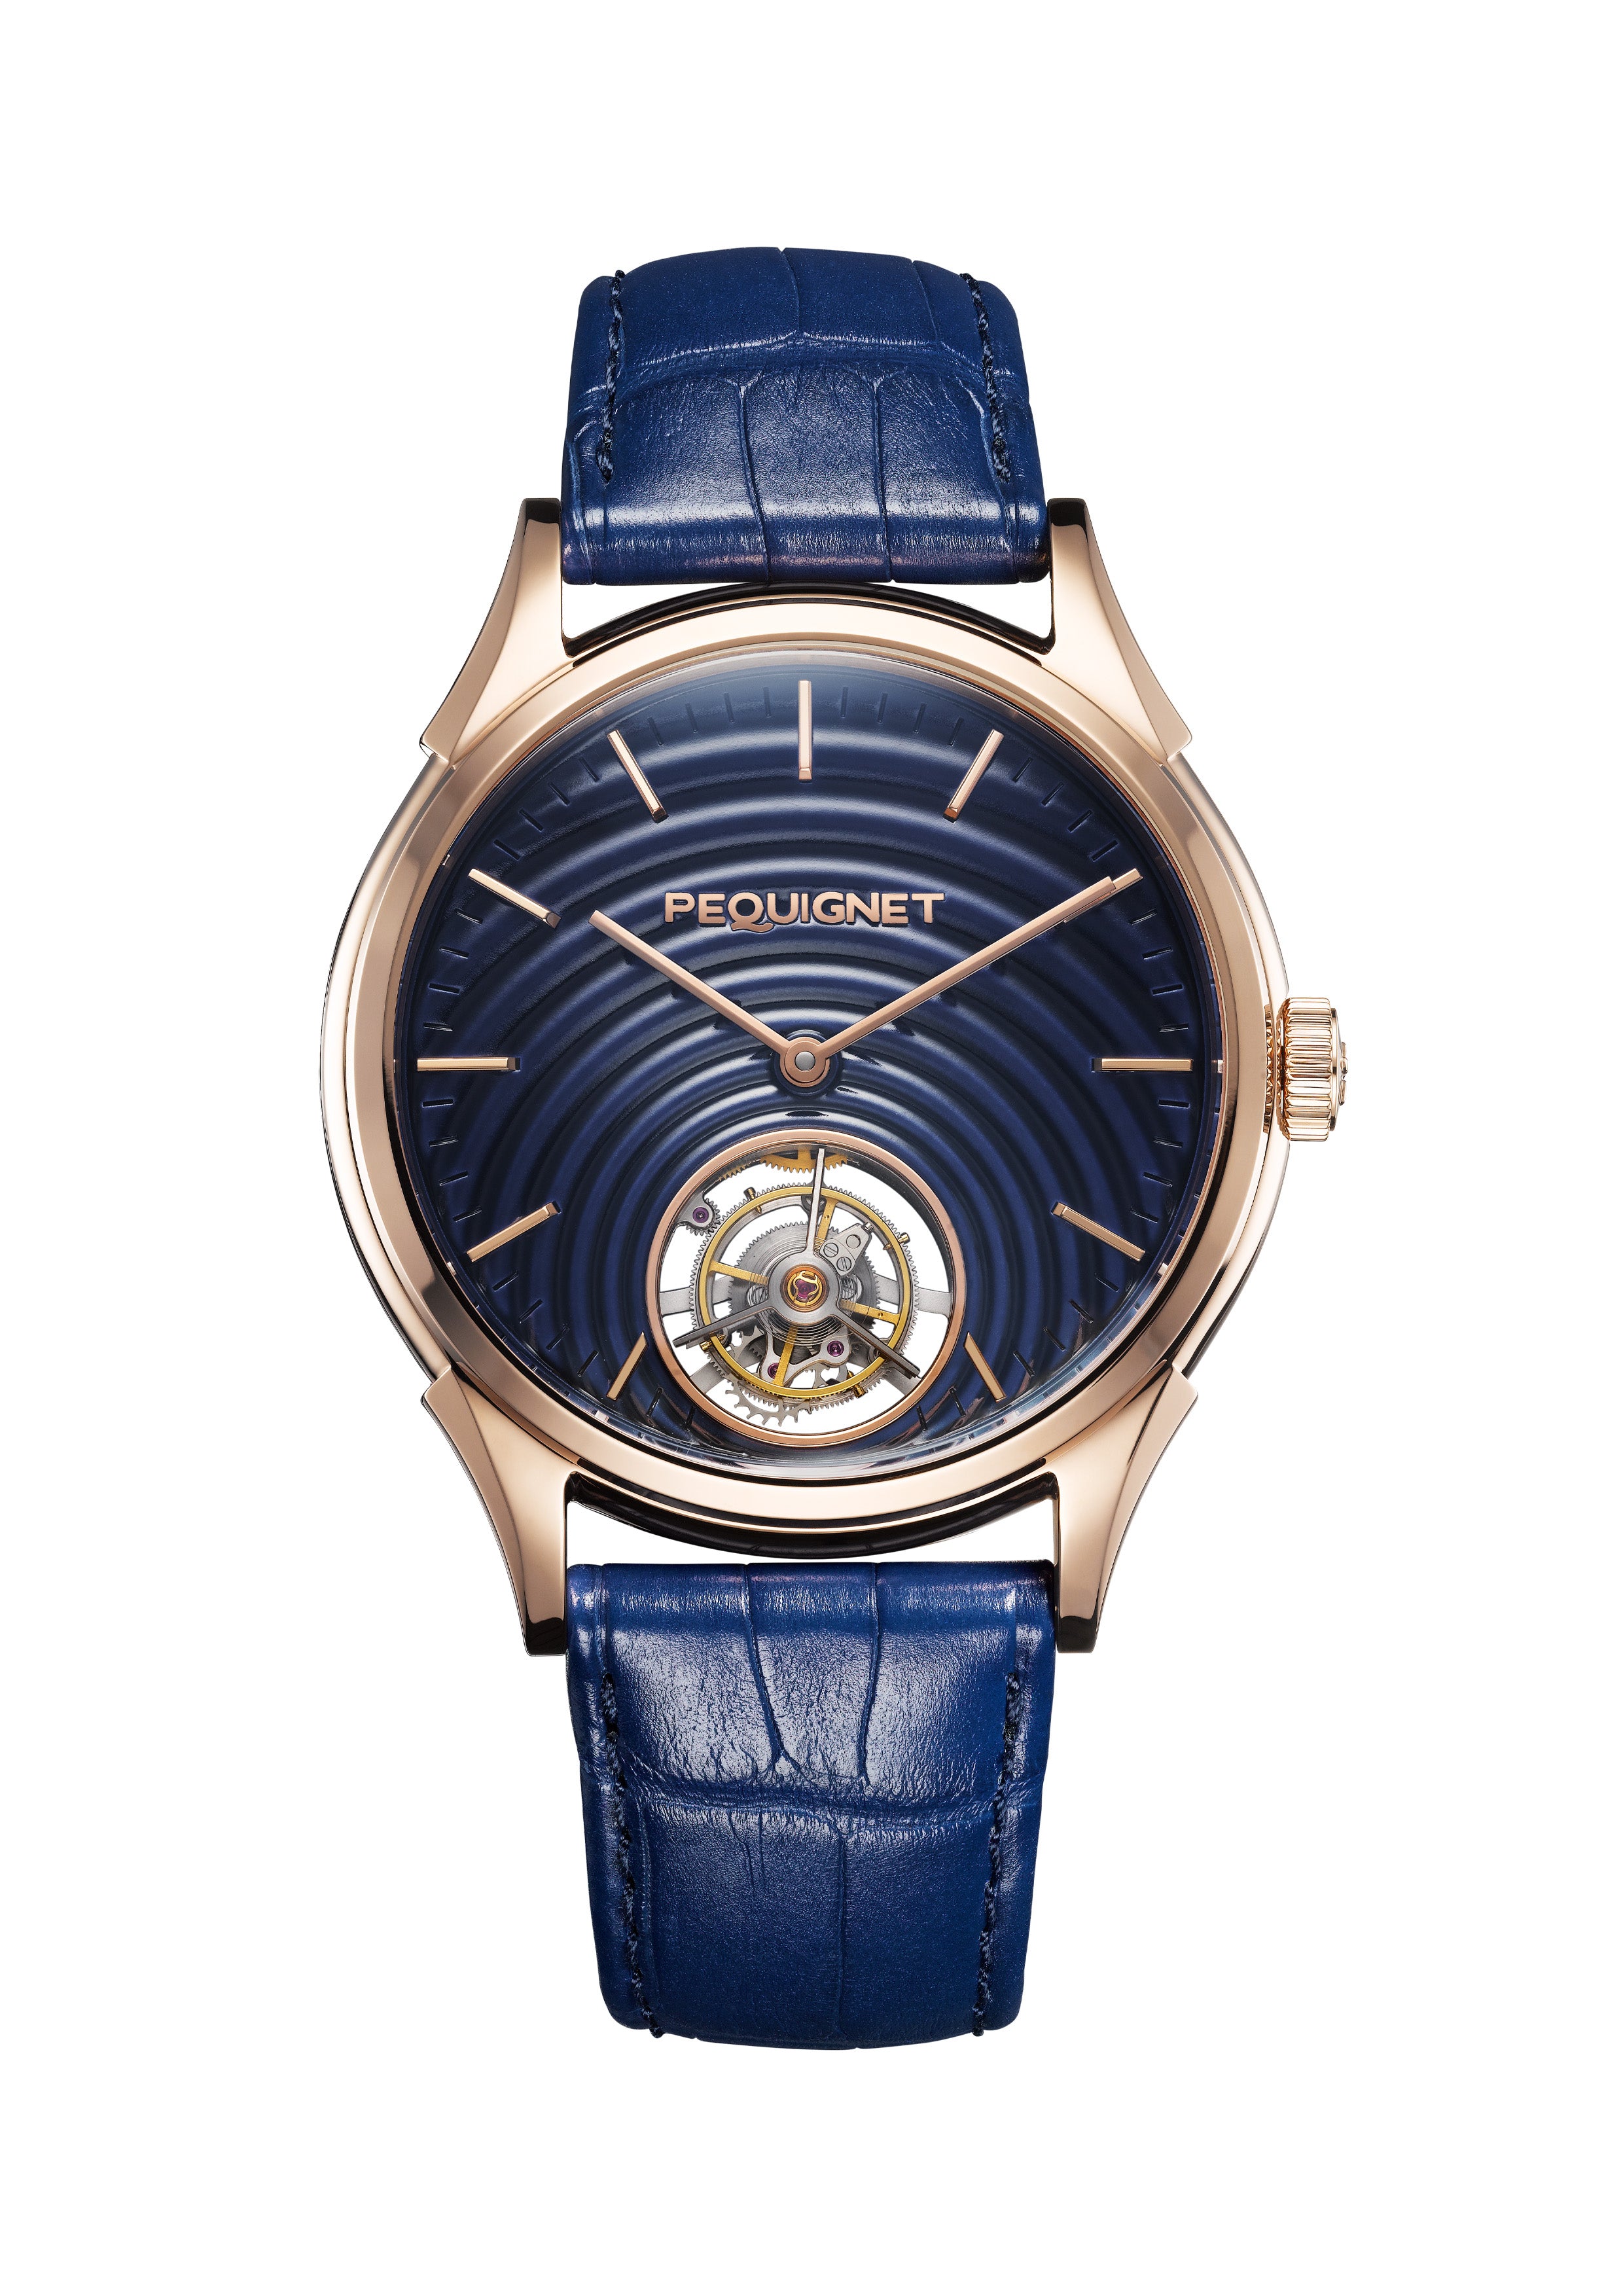 Pre-order Royale Tourbillon watch - Limited edition